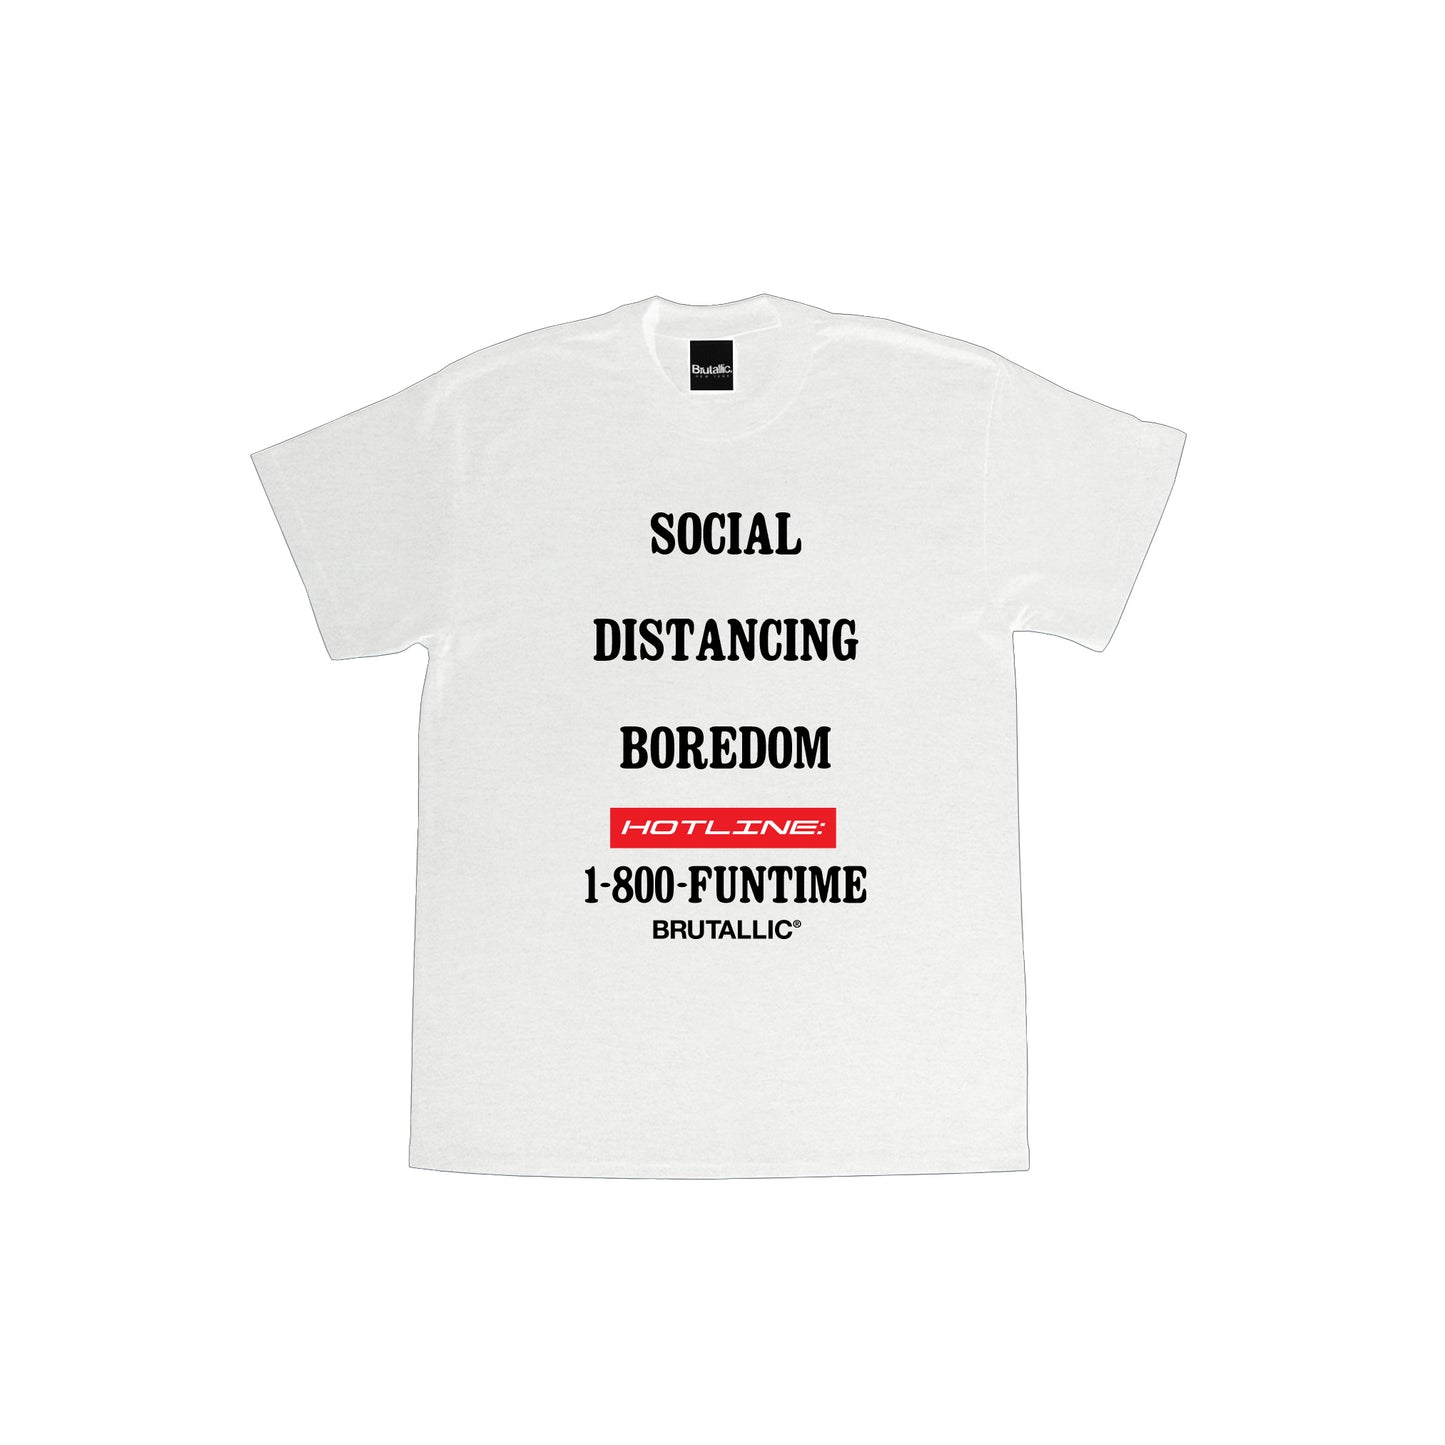 SOCIAL DISTANCING TEE - WHITE